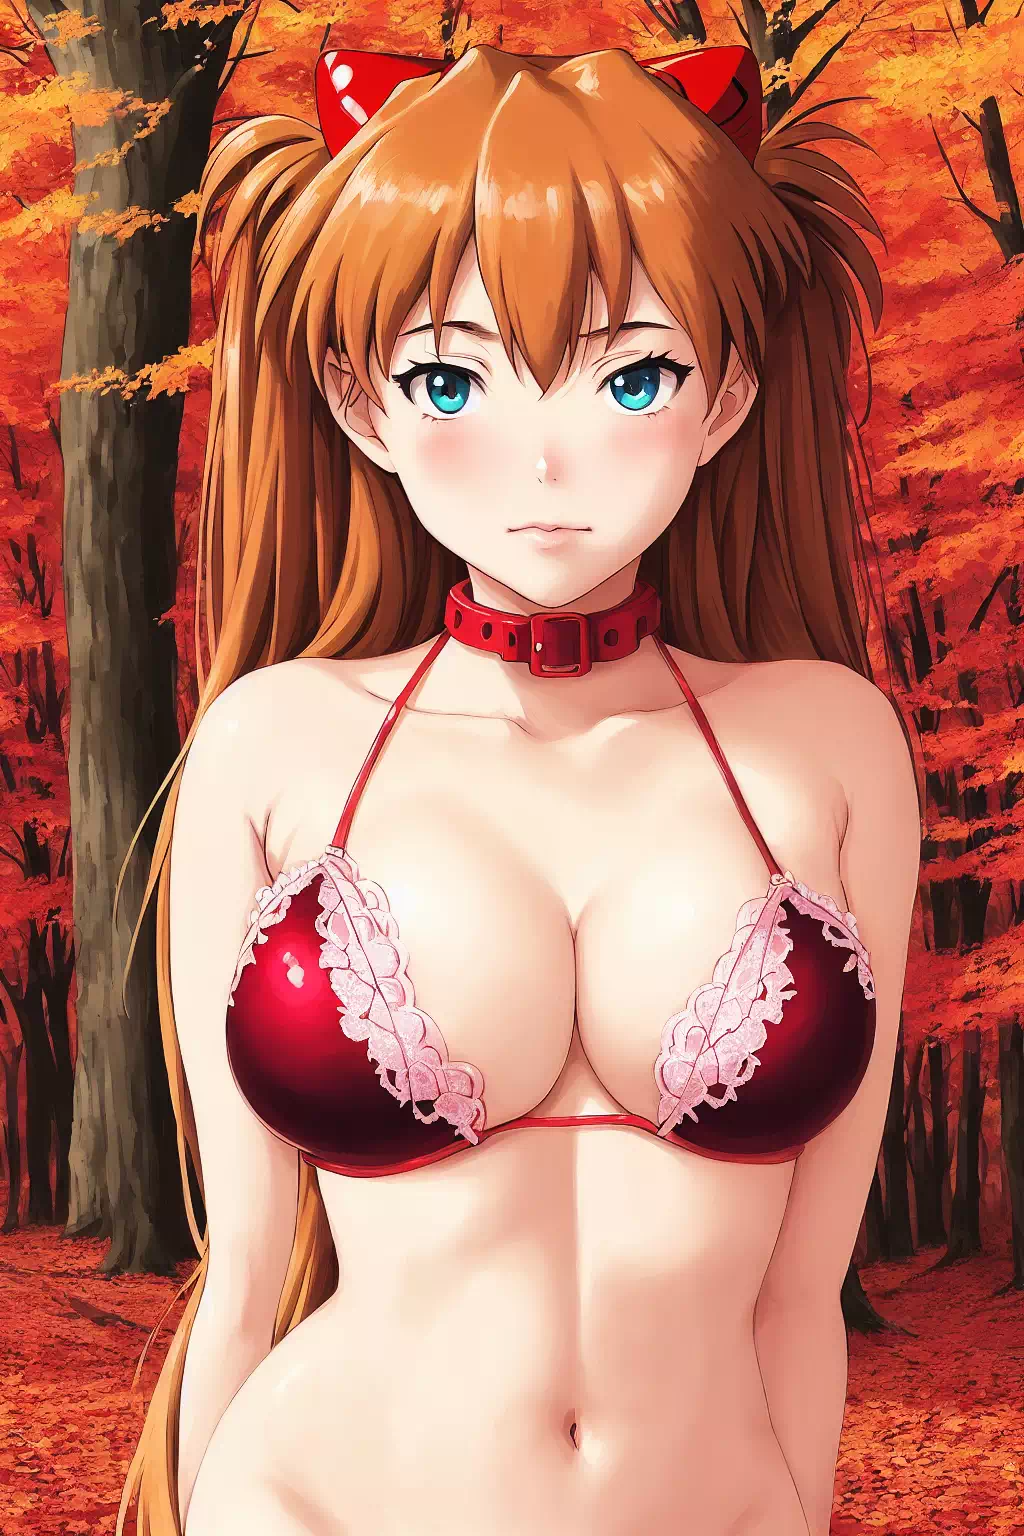 SFW Asuka and Rei pics in forest